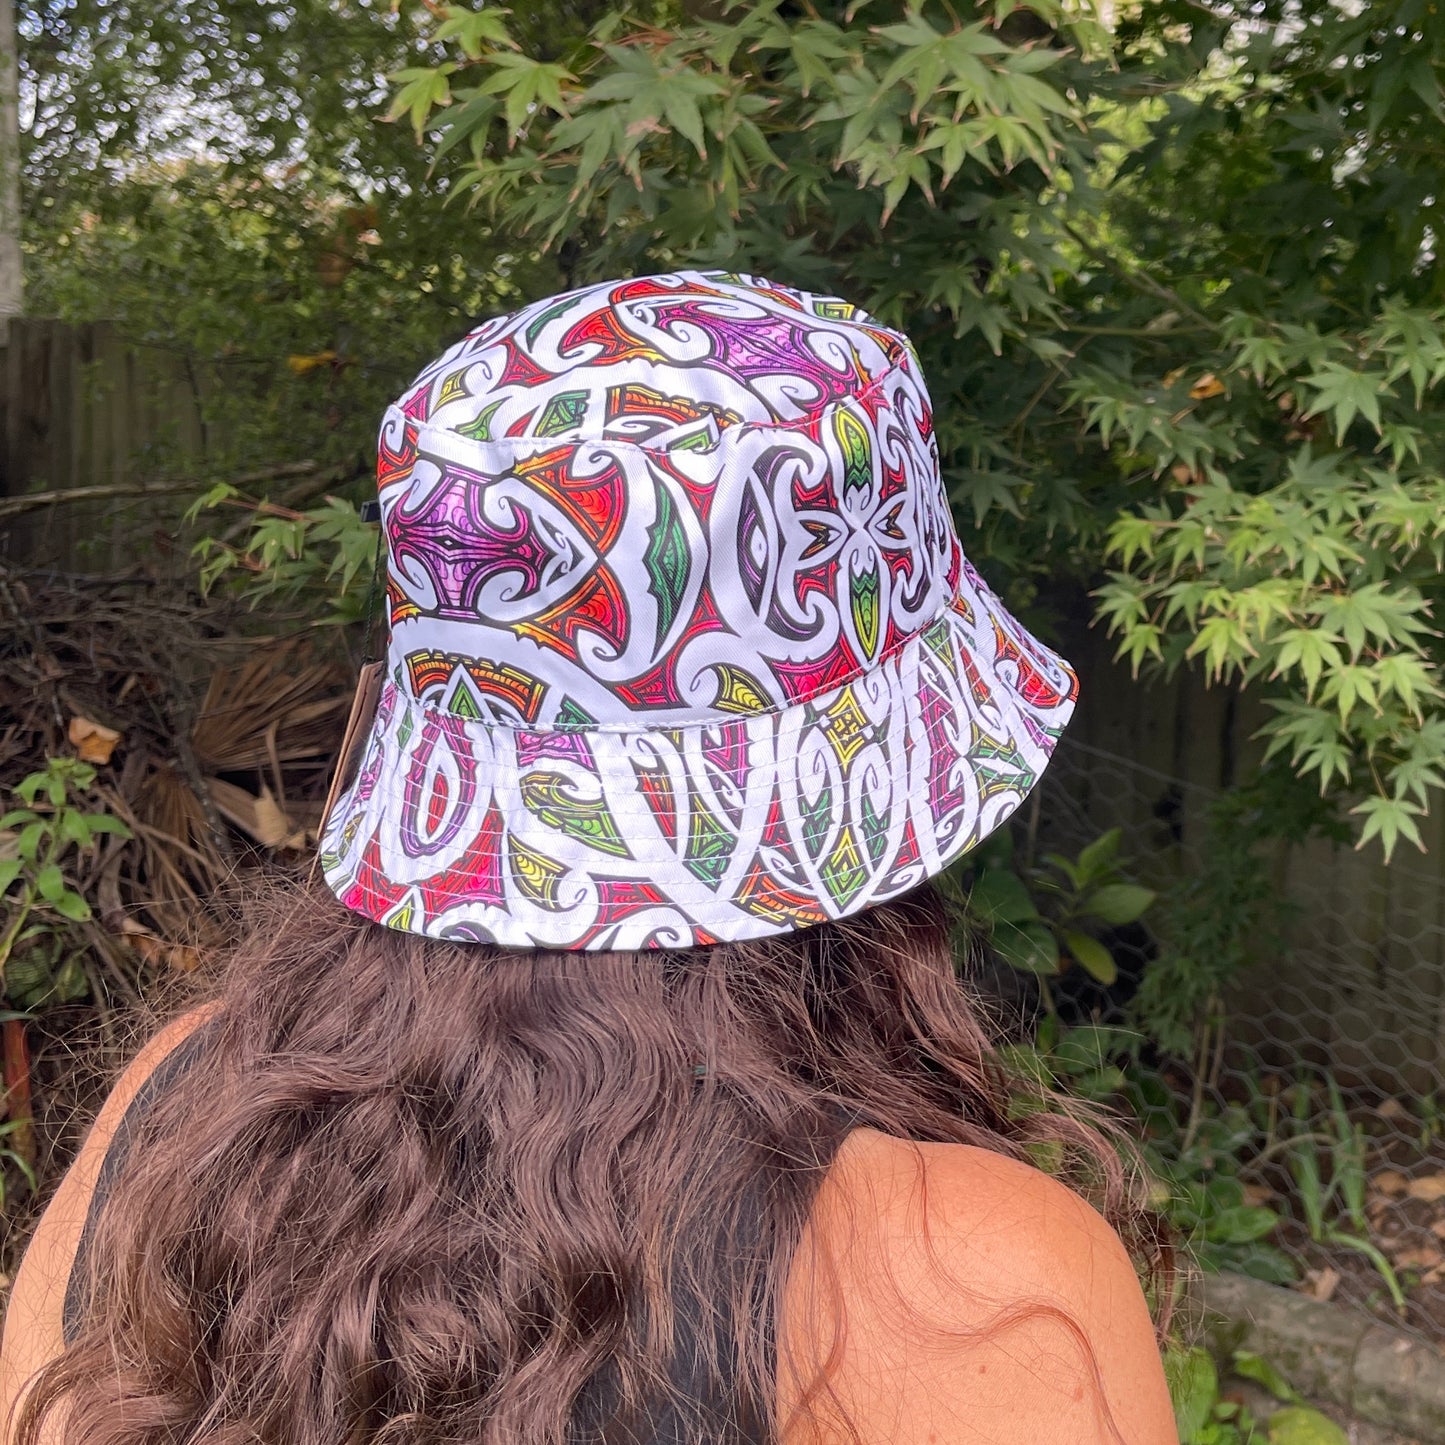 Back view of a woman with long brown hair head wearing a bucket hat in bright colours with koru patterns in white printed on it.